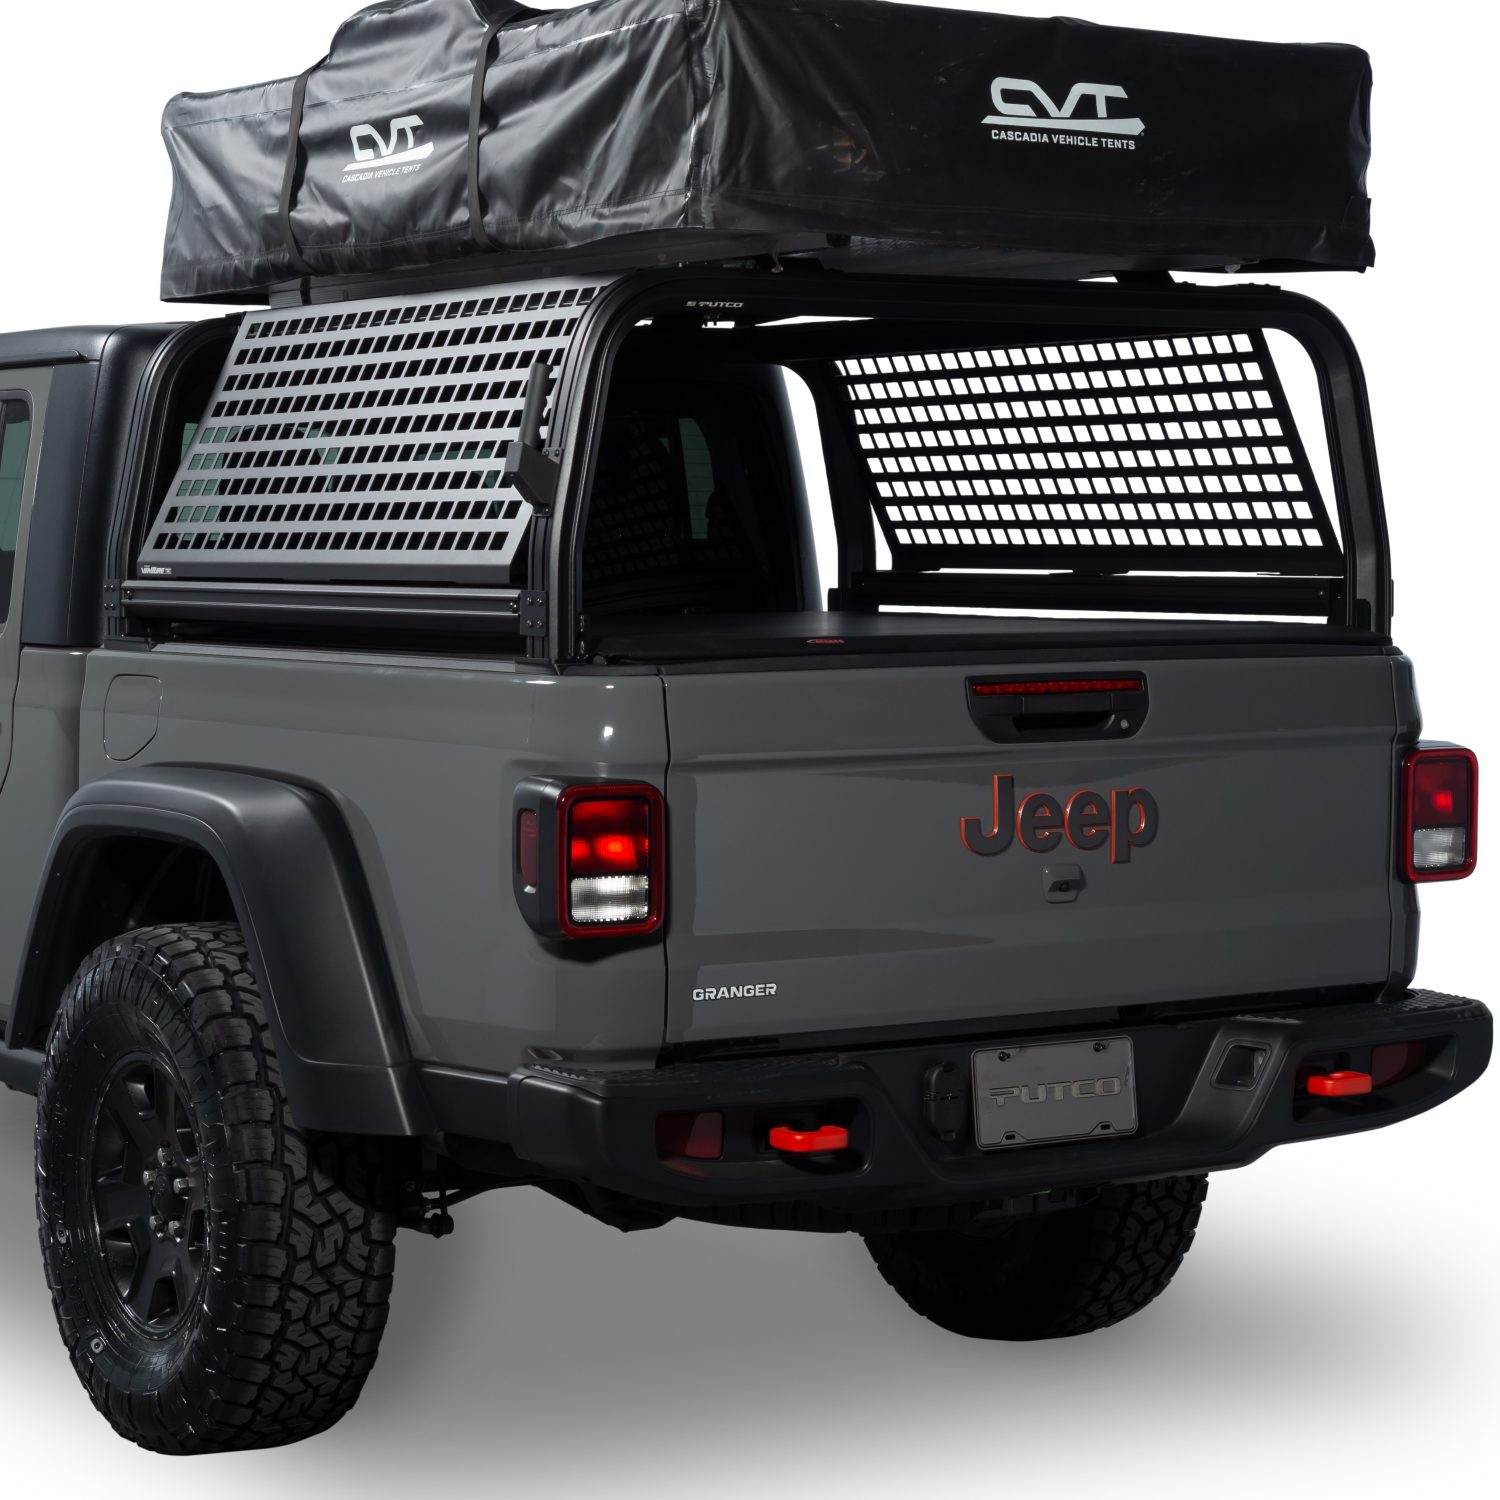 https://www.putco.com/wp-content/uploads/Putco-Venture-Tec-Rack-for-Jeep-Gladiator-with-Tonneau-Cover-extremely-modular-for-your-exact-needs.-e1682353731615.jpg